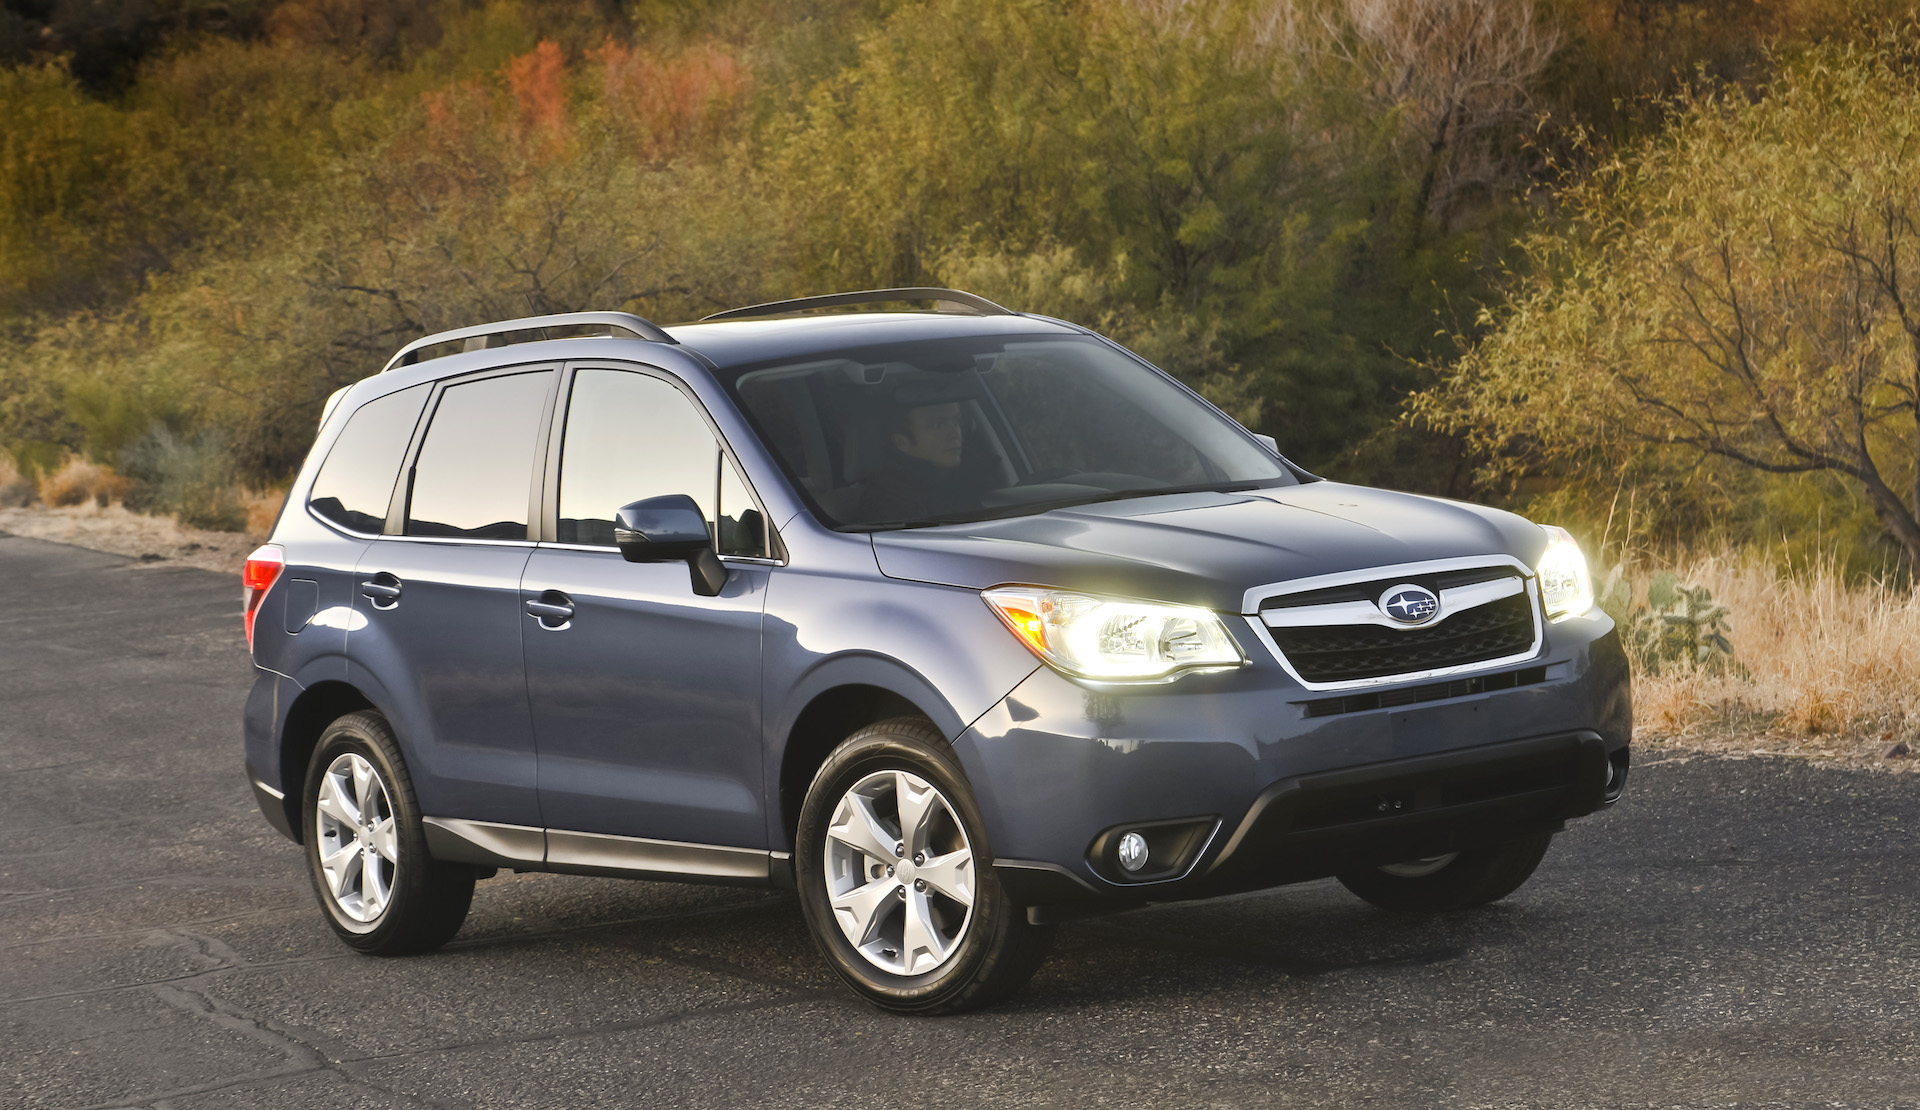 2015 Subaru Forester prices and expert review - The Car Connection